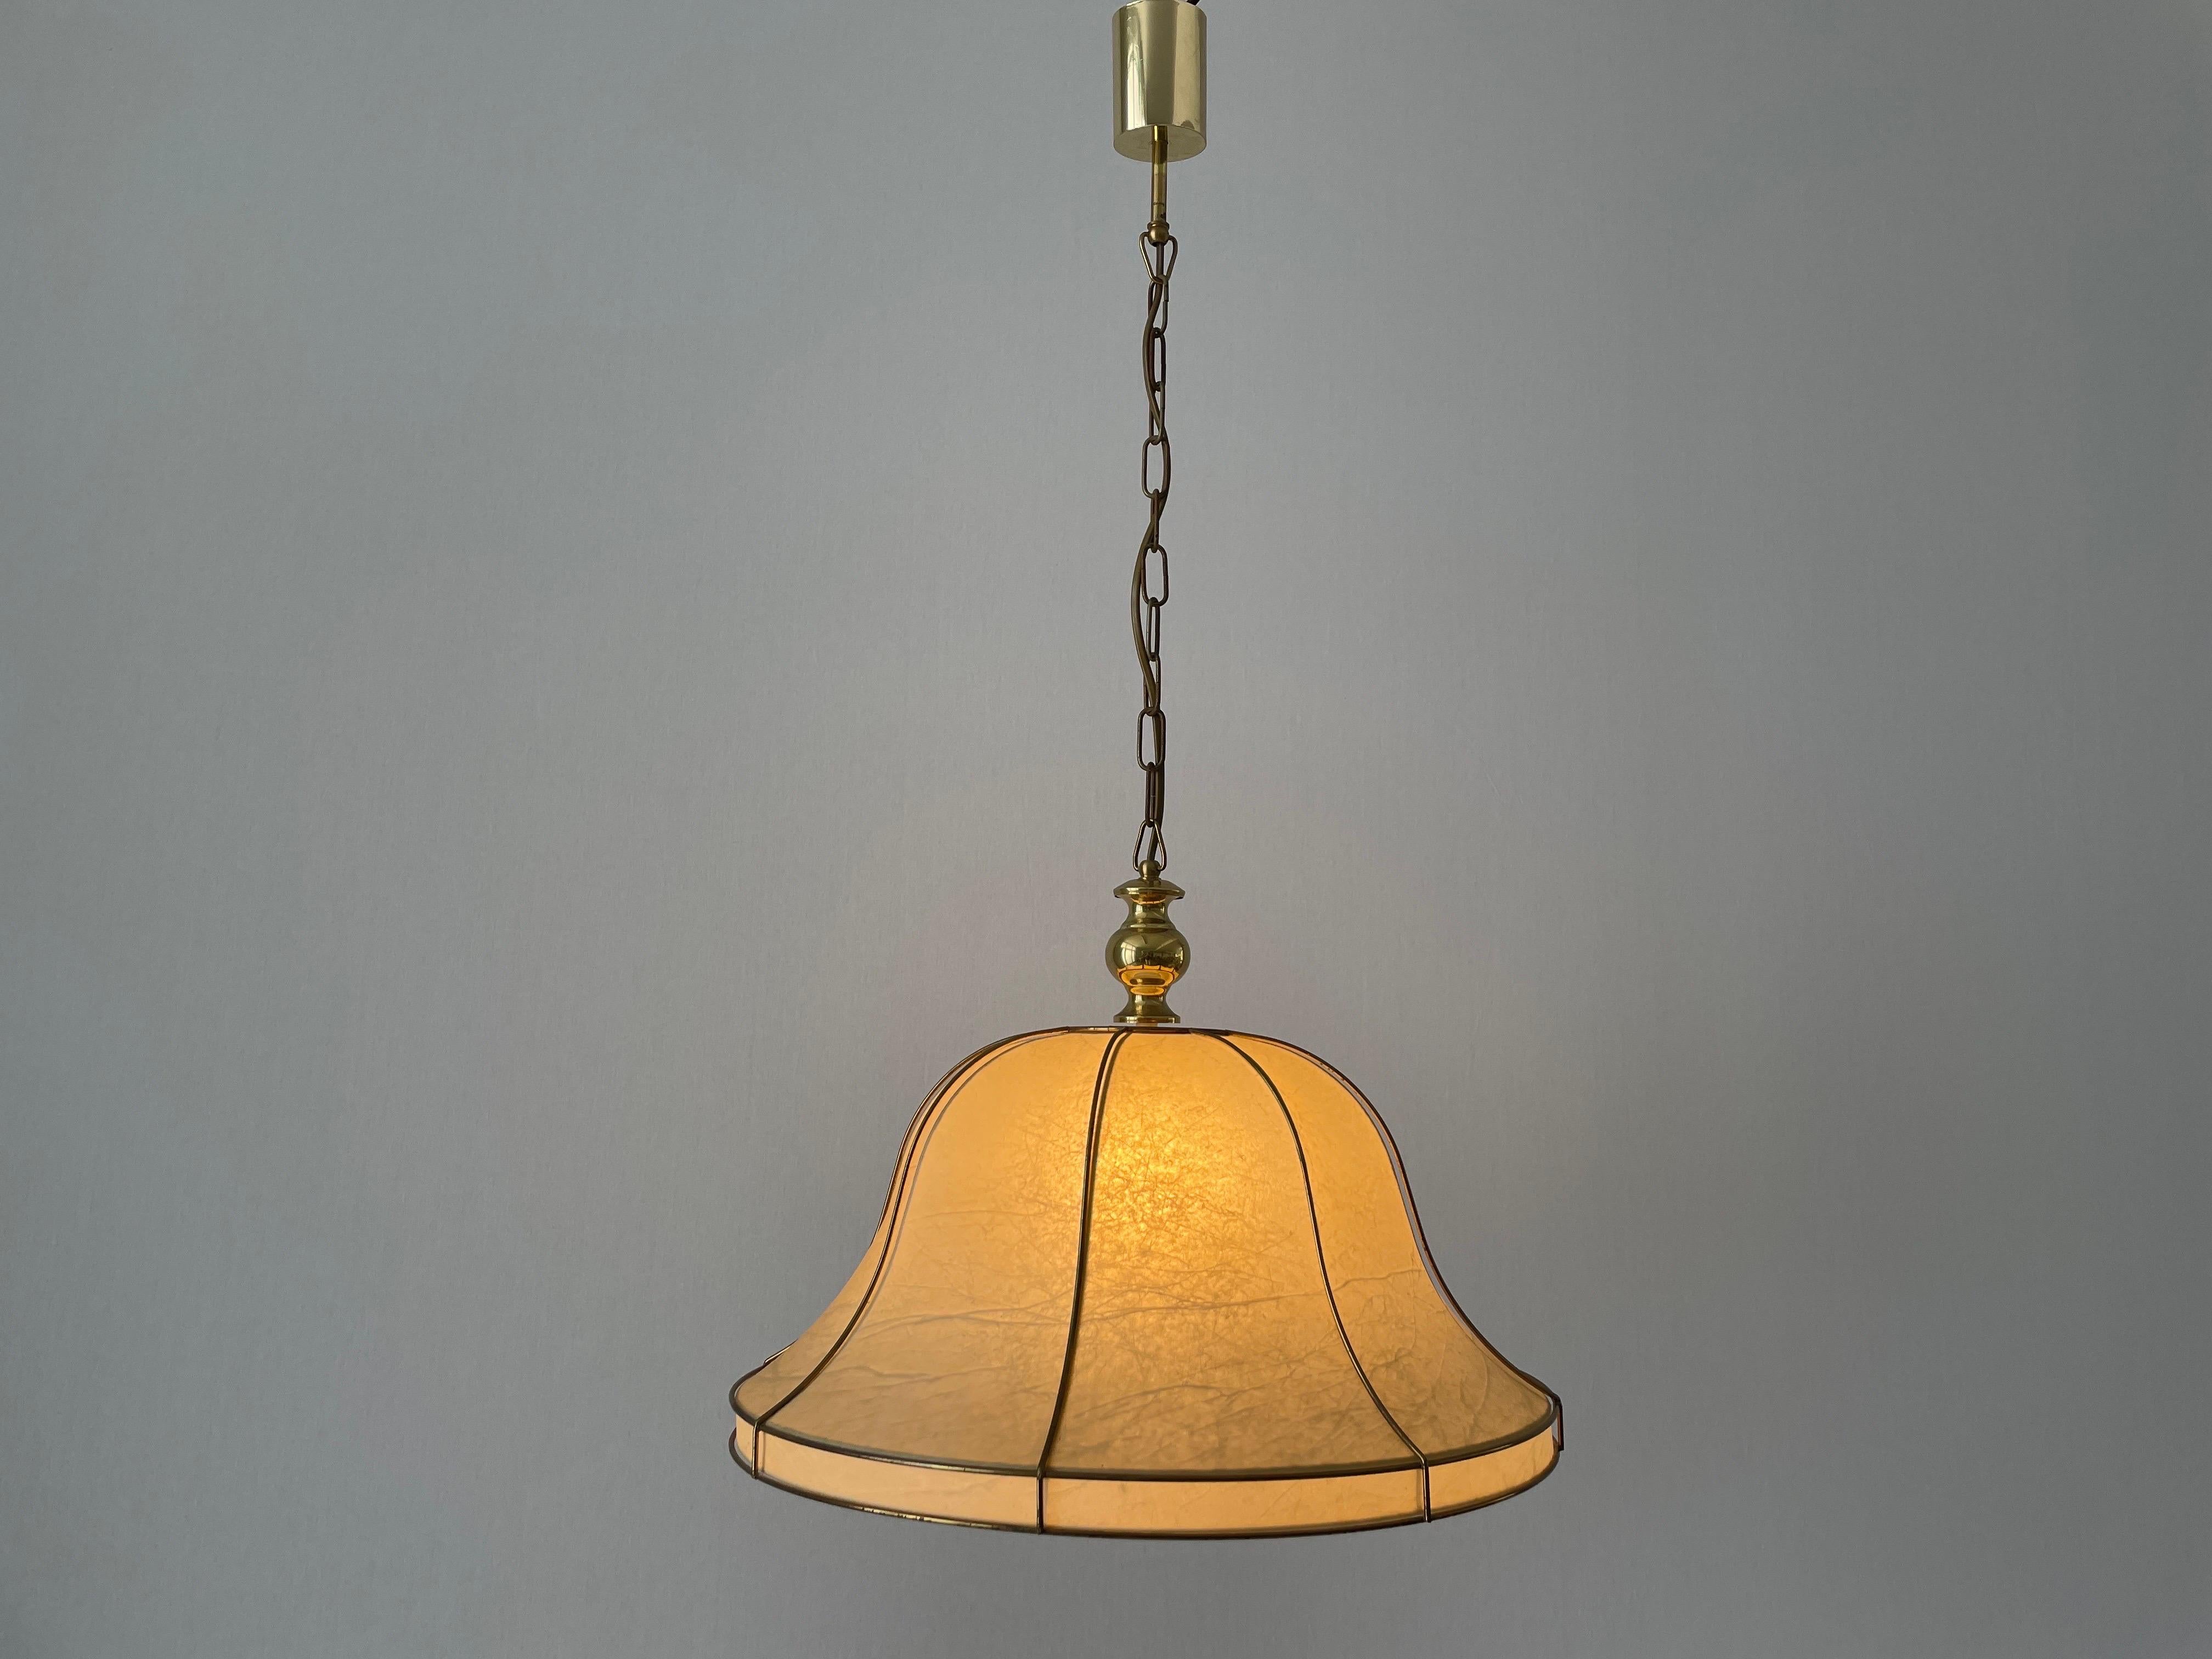 Cocoon Pendant Lamp with Gold Metal Shade Frame by Goldkant, 1960s, Germany For Sale 7